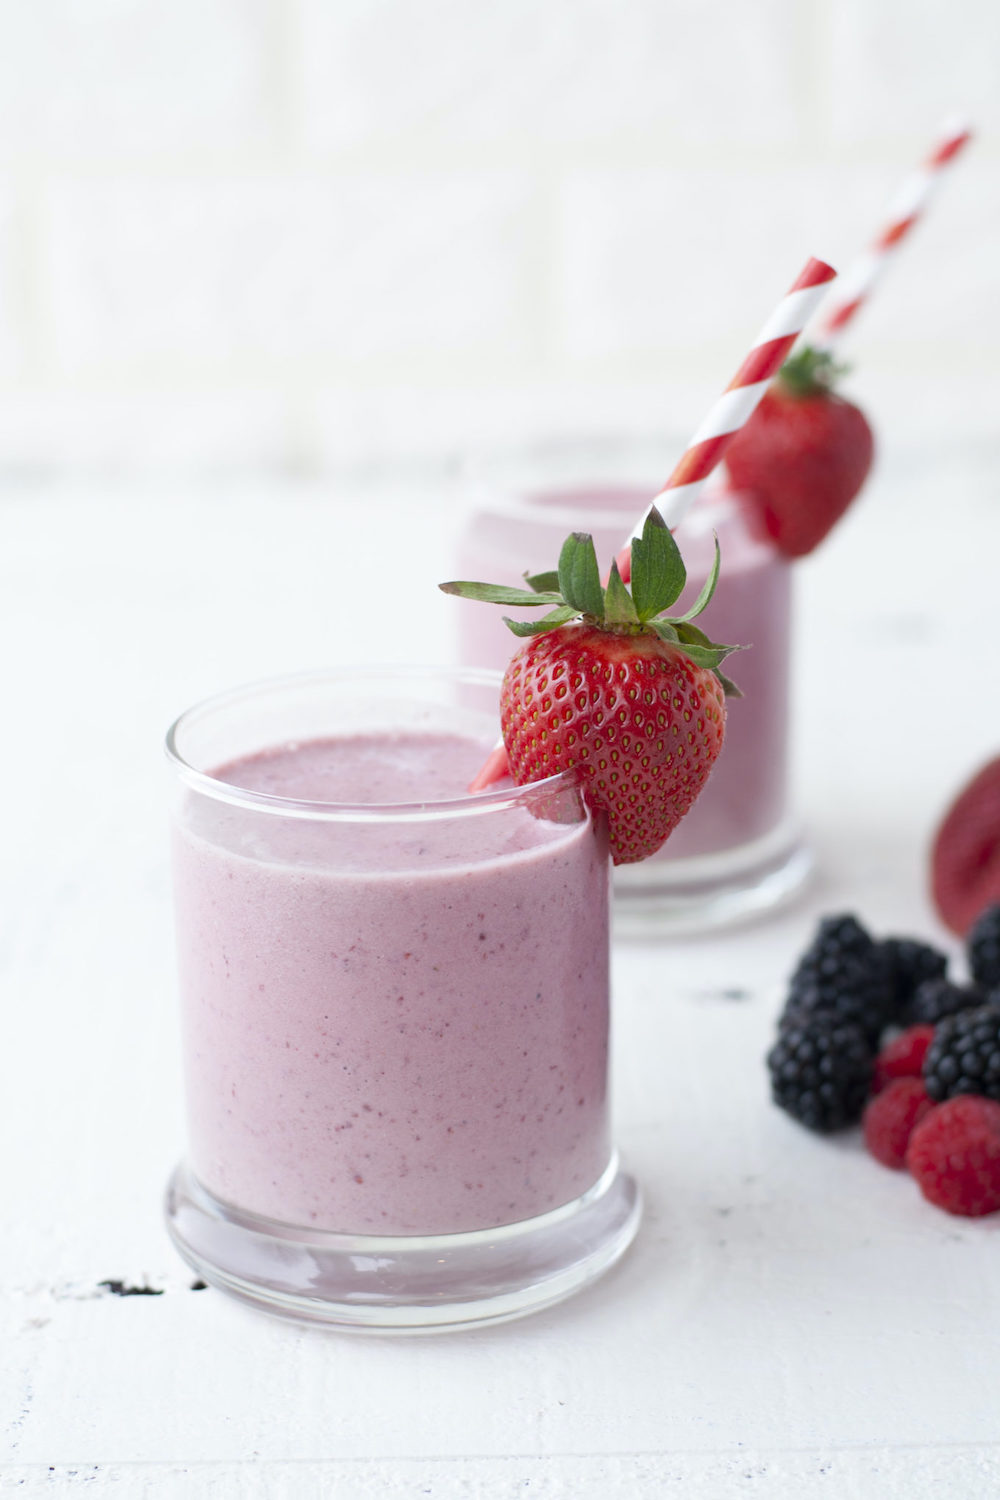 15 Keto Smoothies That Will Satisfy Your Sweet Cravings